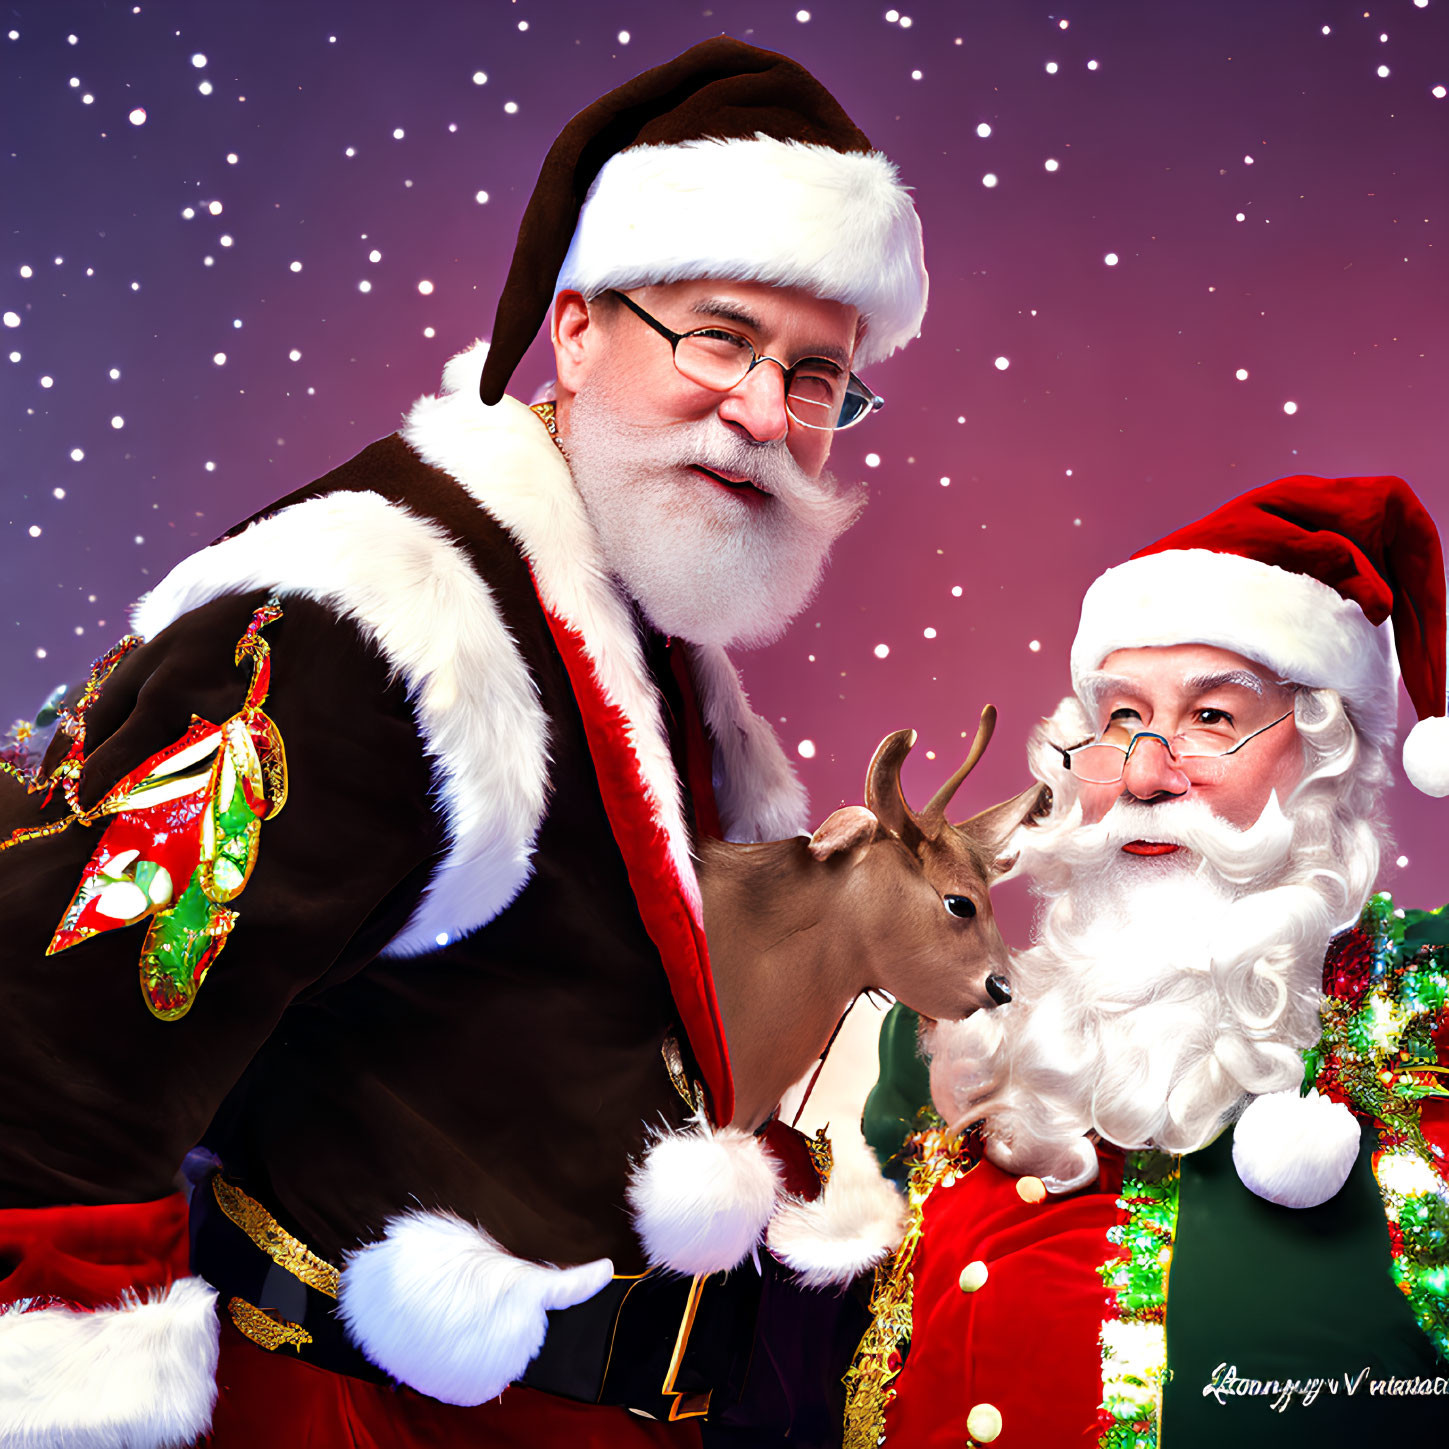 Santa Claus Figures with Reindeer Toy on Snowflake Background